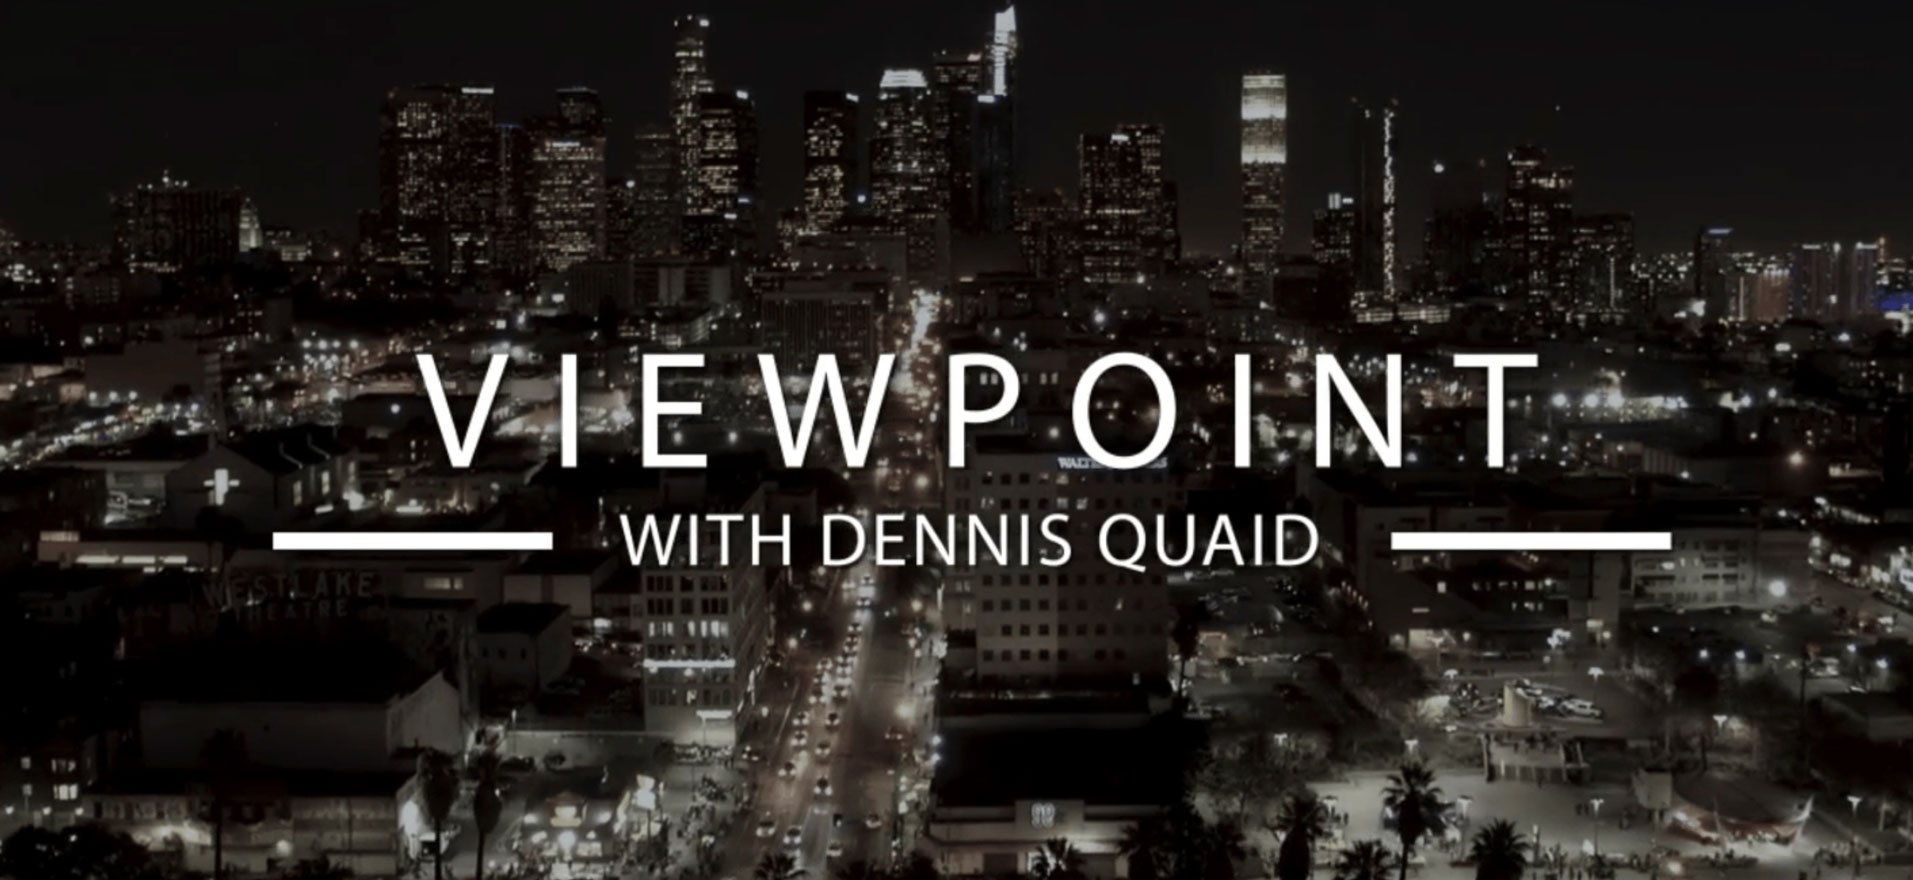 InSync Training Featured on Viewpoint with Dennis Quaid